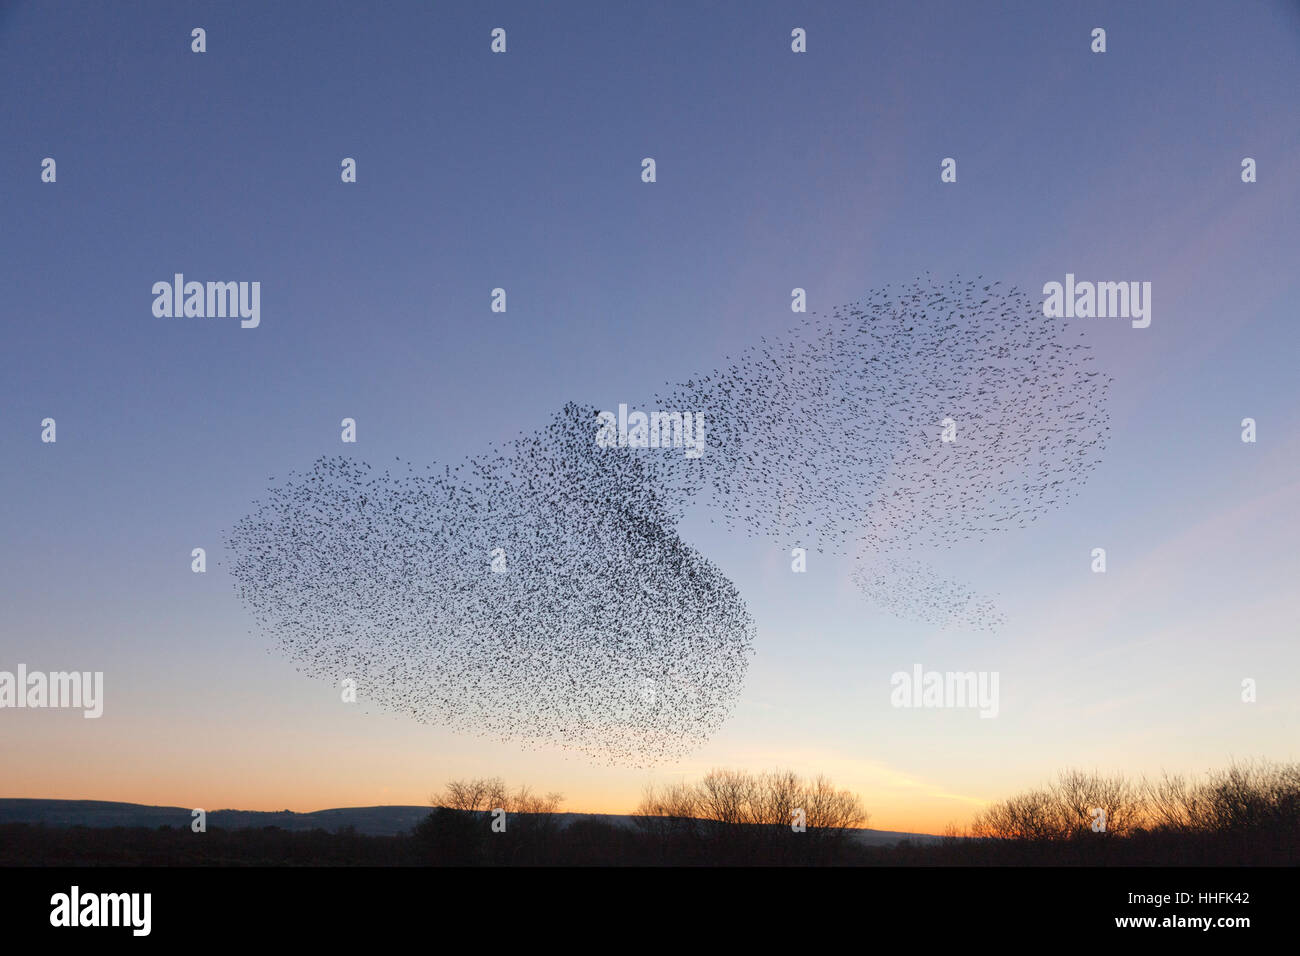 Studland, UK. 18th January 2017. Magnificent display of starlings above the heathland near the ferry terminal at Shell Bay. A crowd of onlookers and photographers of all ages came to watch the murmuration at sunset, before the birds settled down to roost in the reed beds. Credit: Eva Worobiec/Alamy Live News Stock Photo